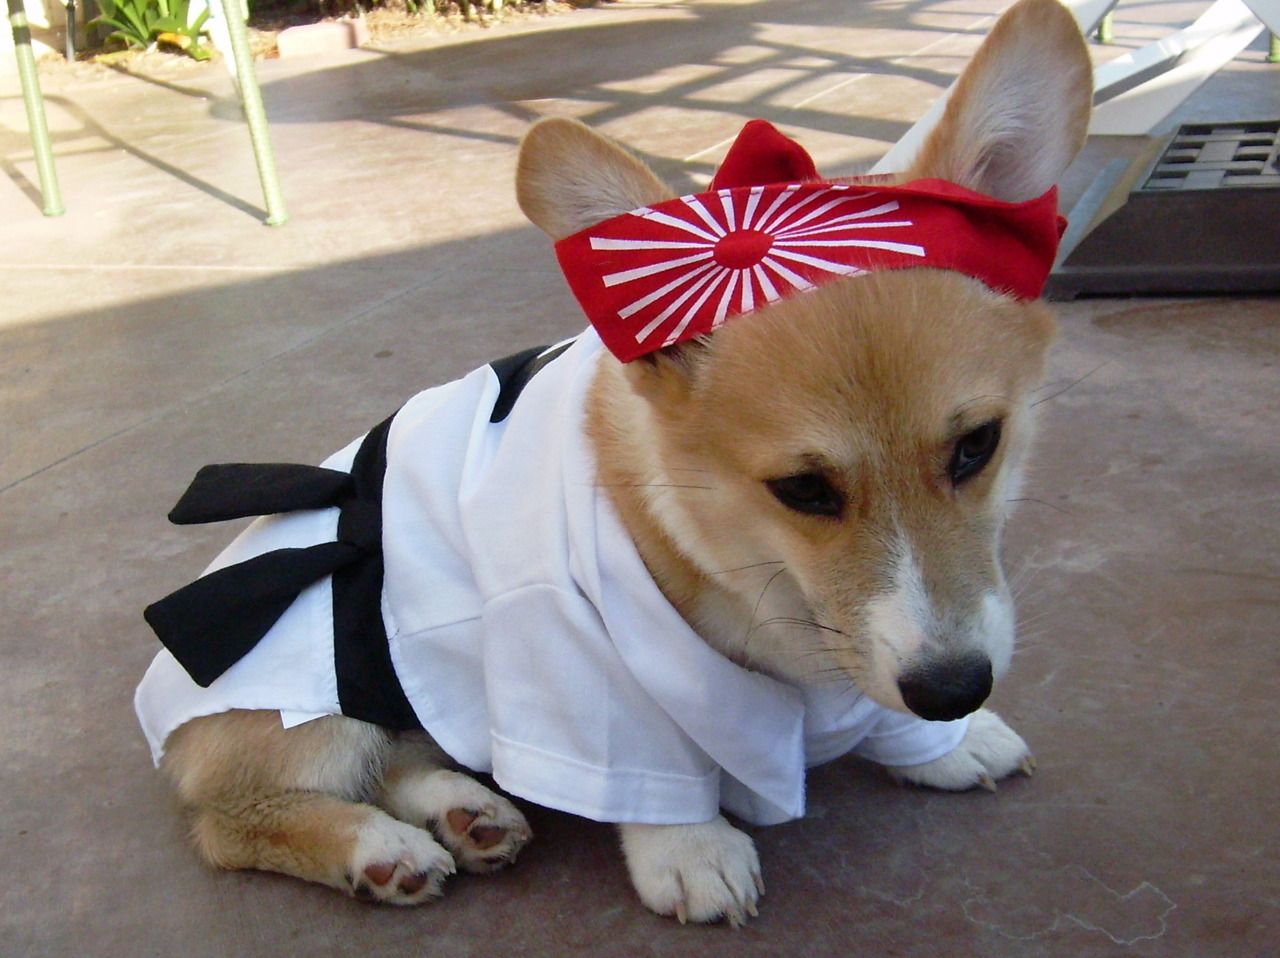 Corgi in its Karate costume while sitting on the floor